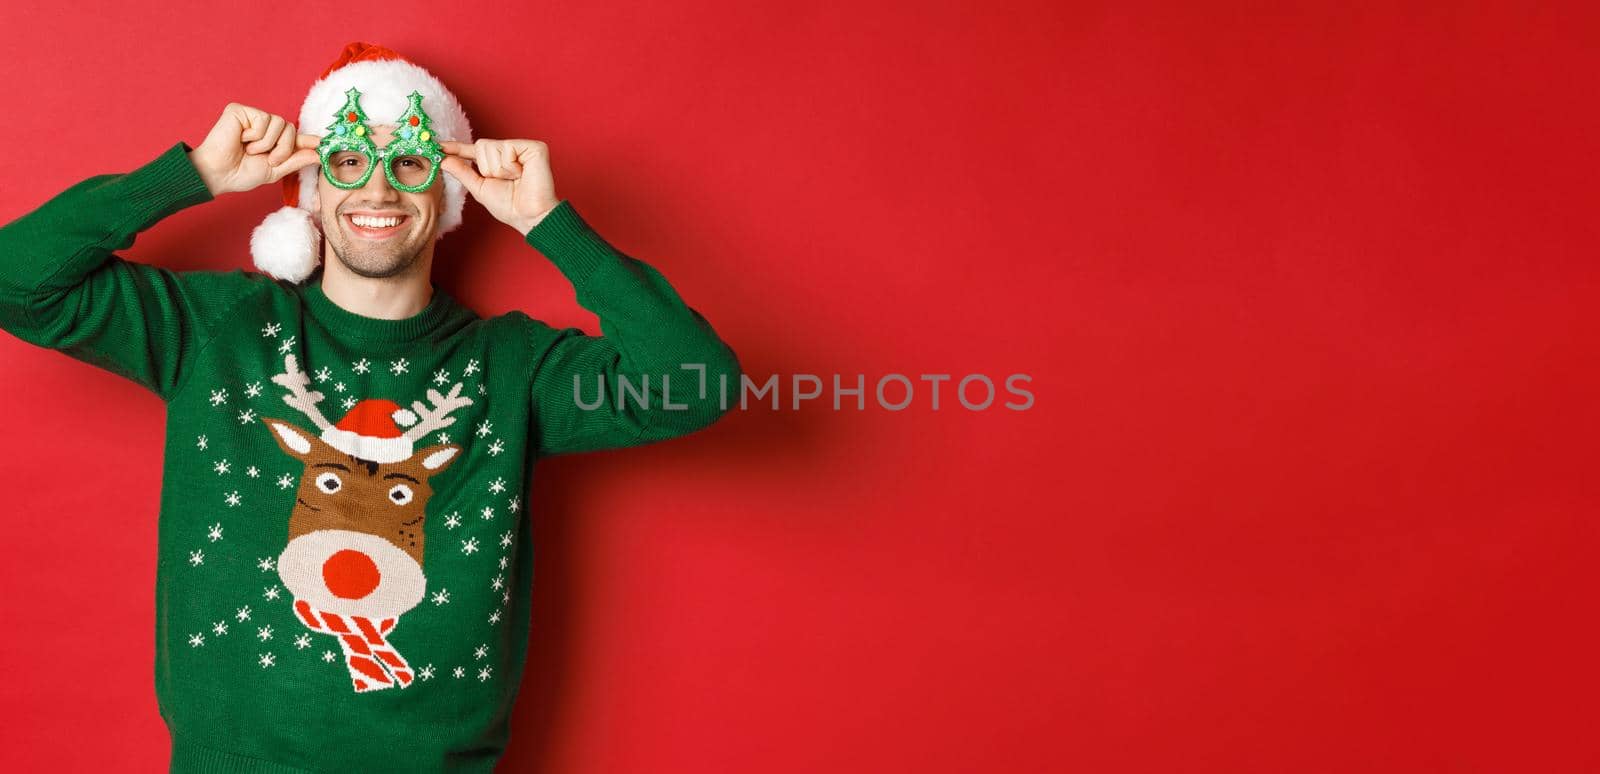 Portrait of attractive smiling man in santa hat, party glasses and sweater, celebrating new year holidays, standing against red background.